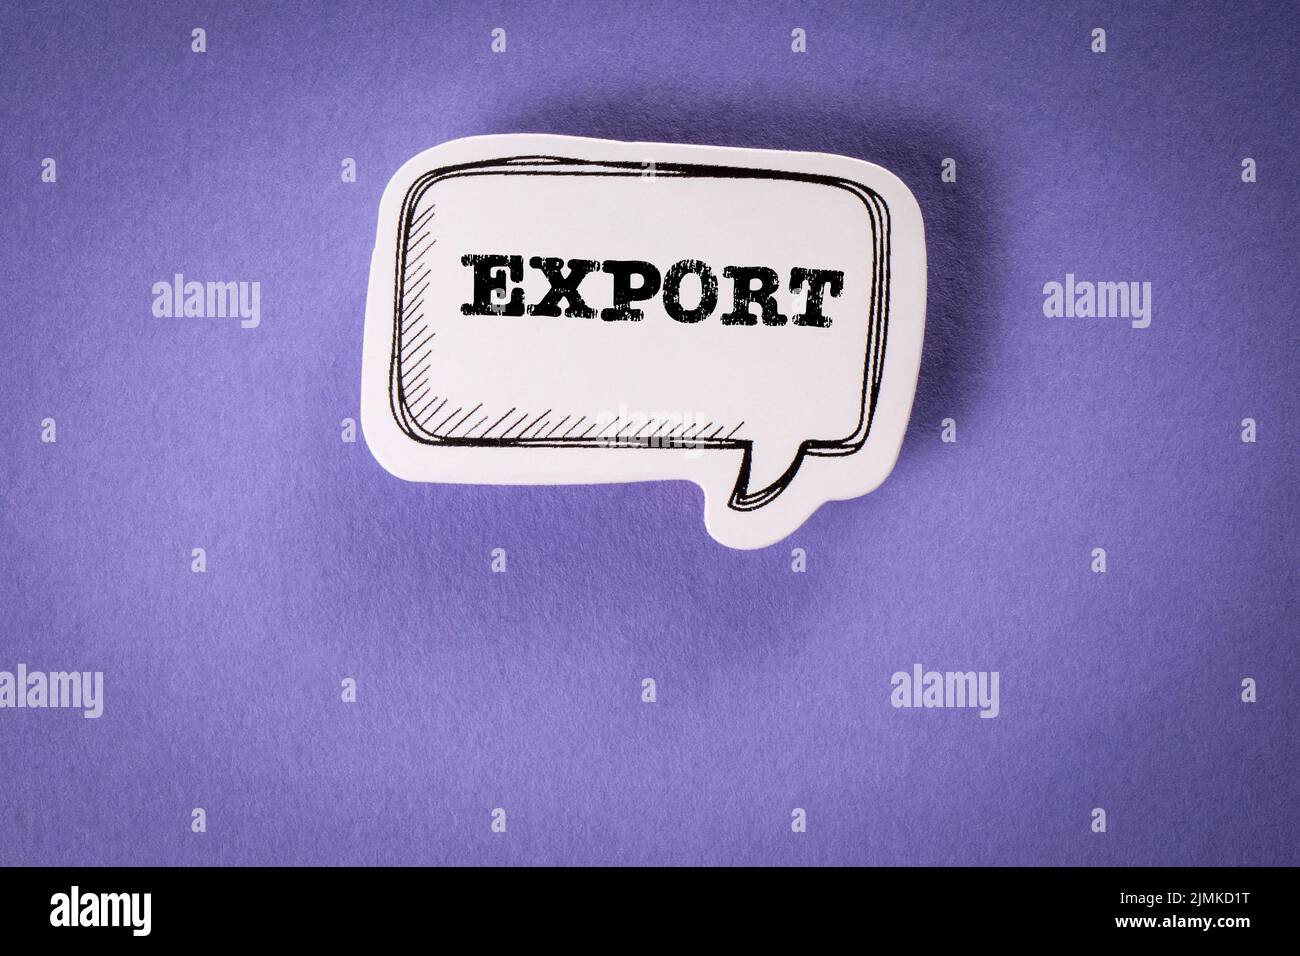 Export. Trade, Shipping and Freight Concept. Speech bubble on purple background. Stock Photo